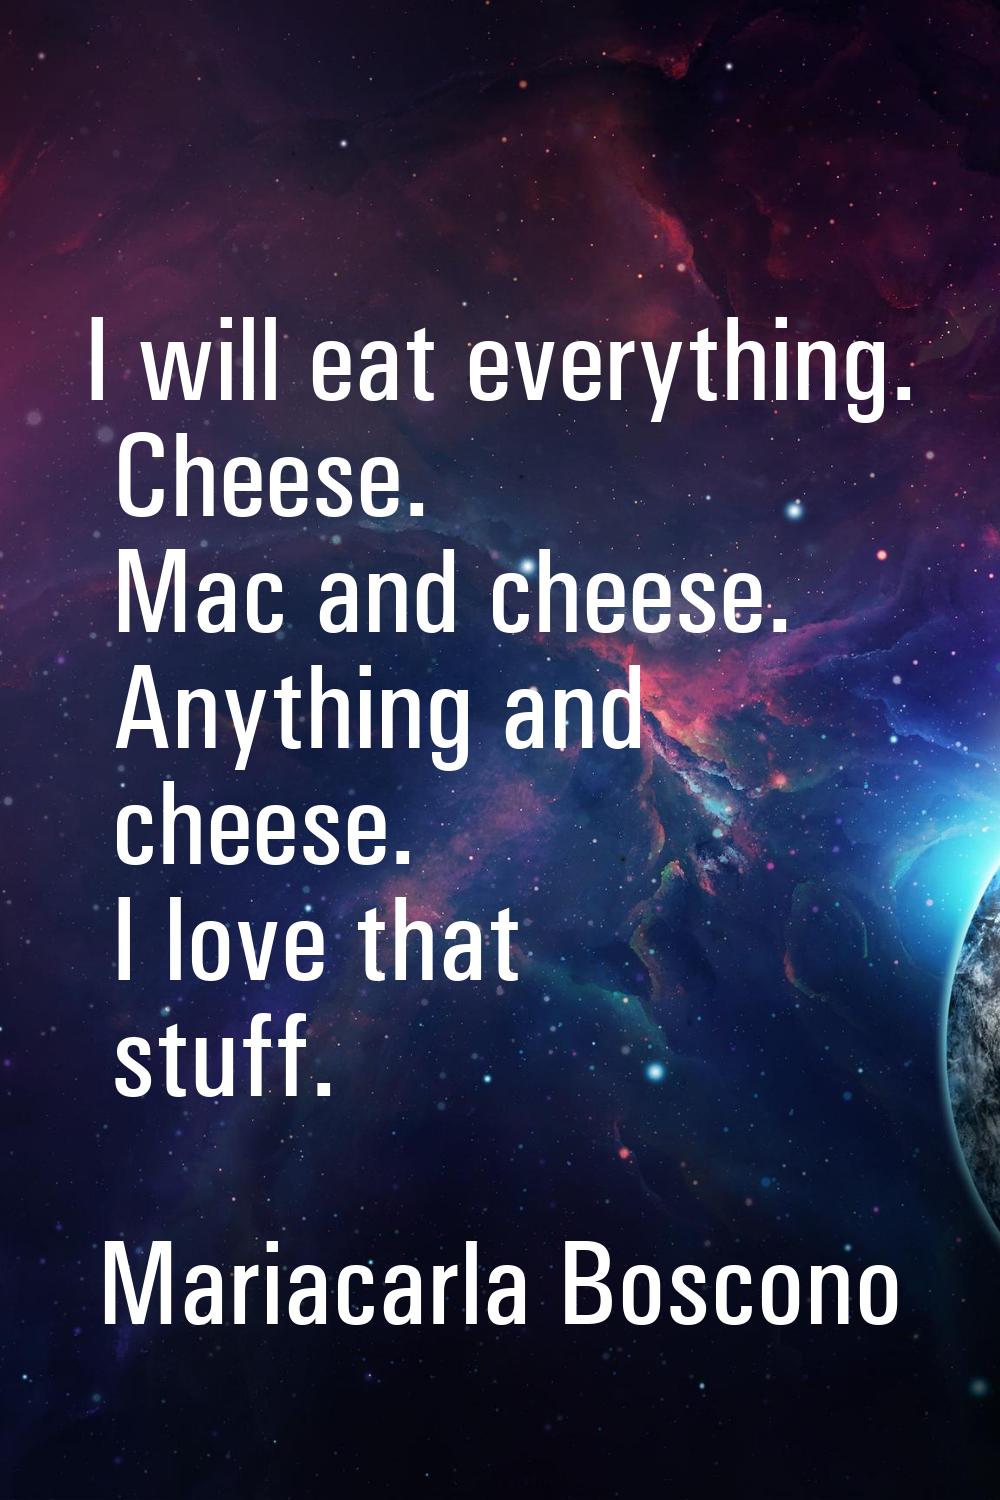 I will eat everything. Cheese. Mac and cheese. Anything and cheese. I love that stuff.